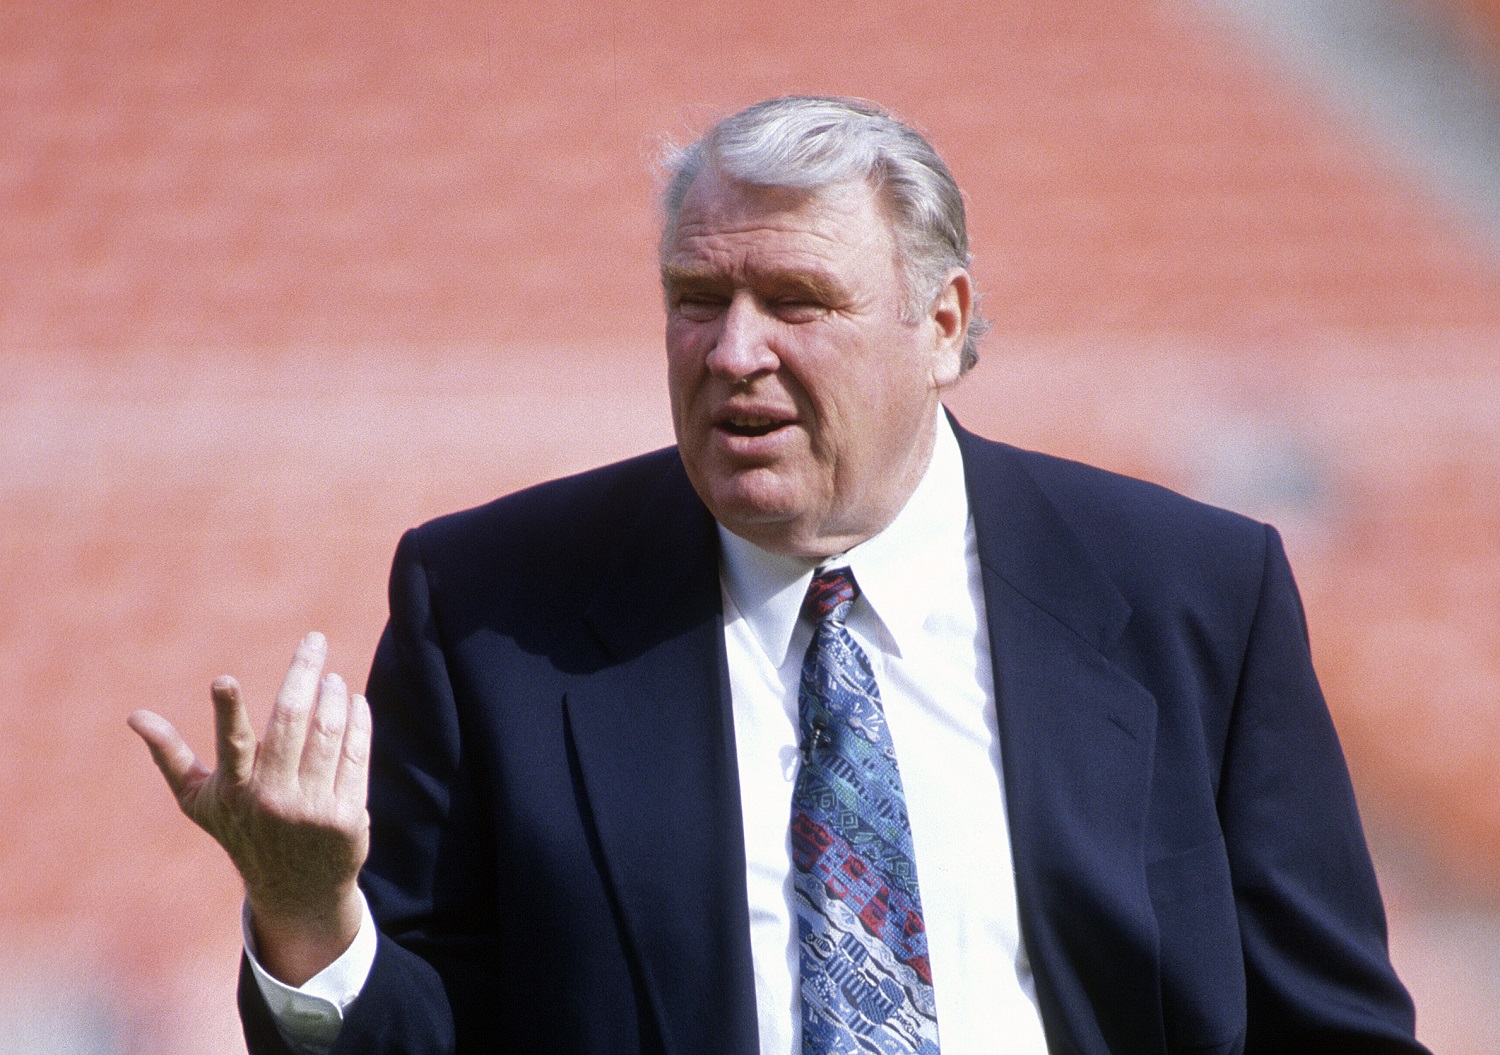 John Madden coached the Oakland Raiders to a victory in Super Bowl 11 and went on to a successful career in broadcasting.